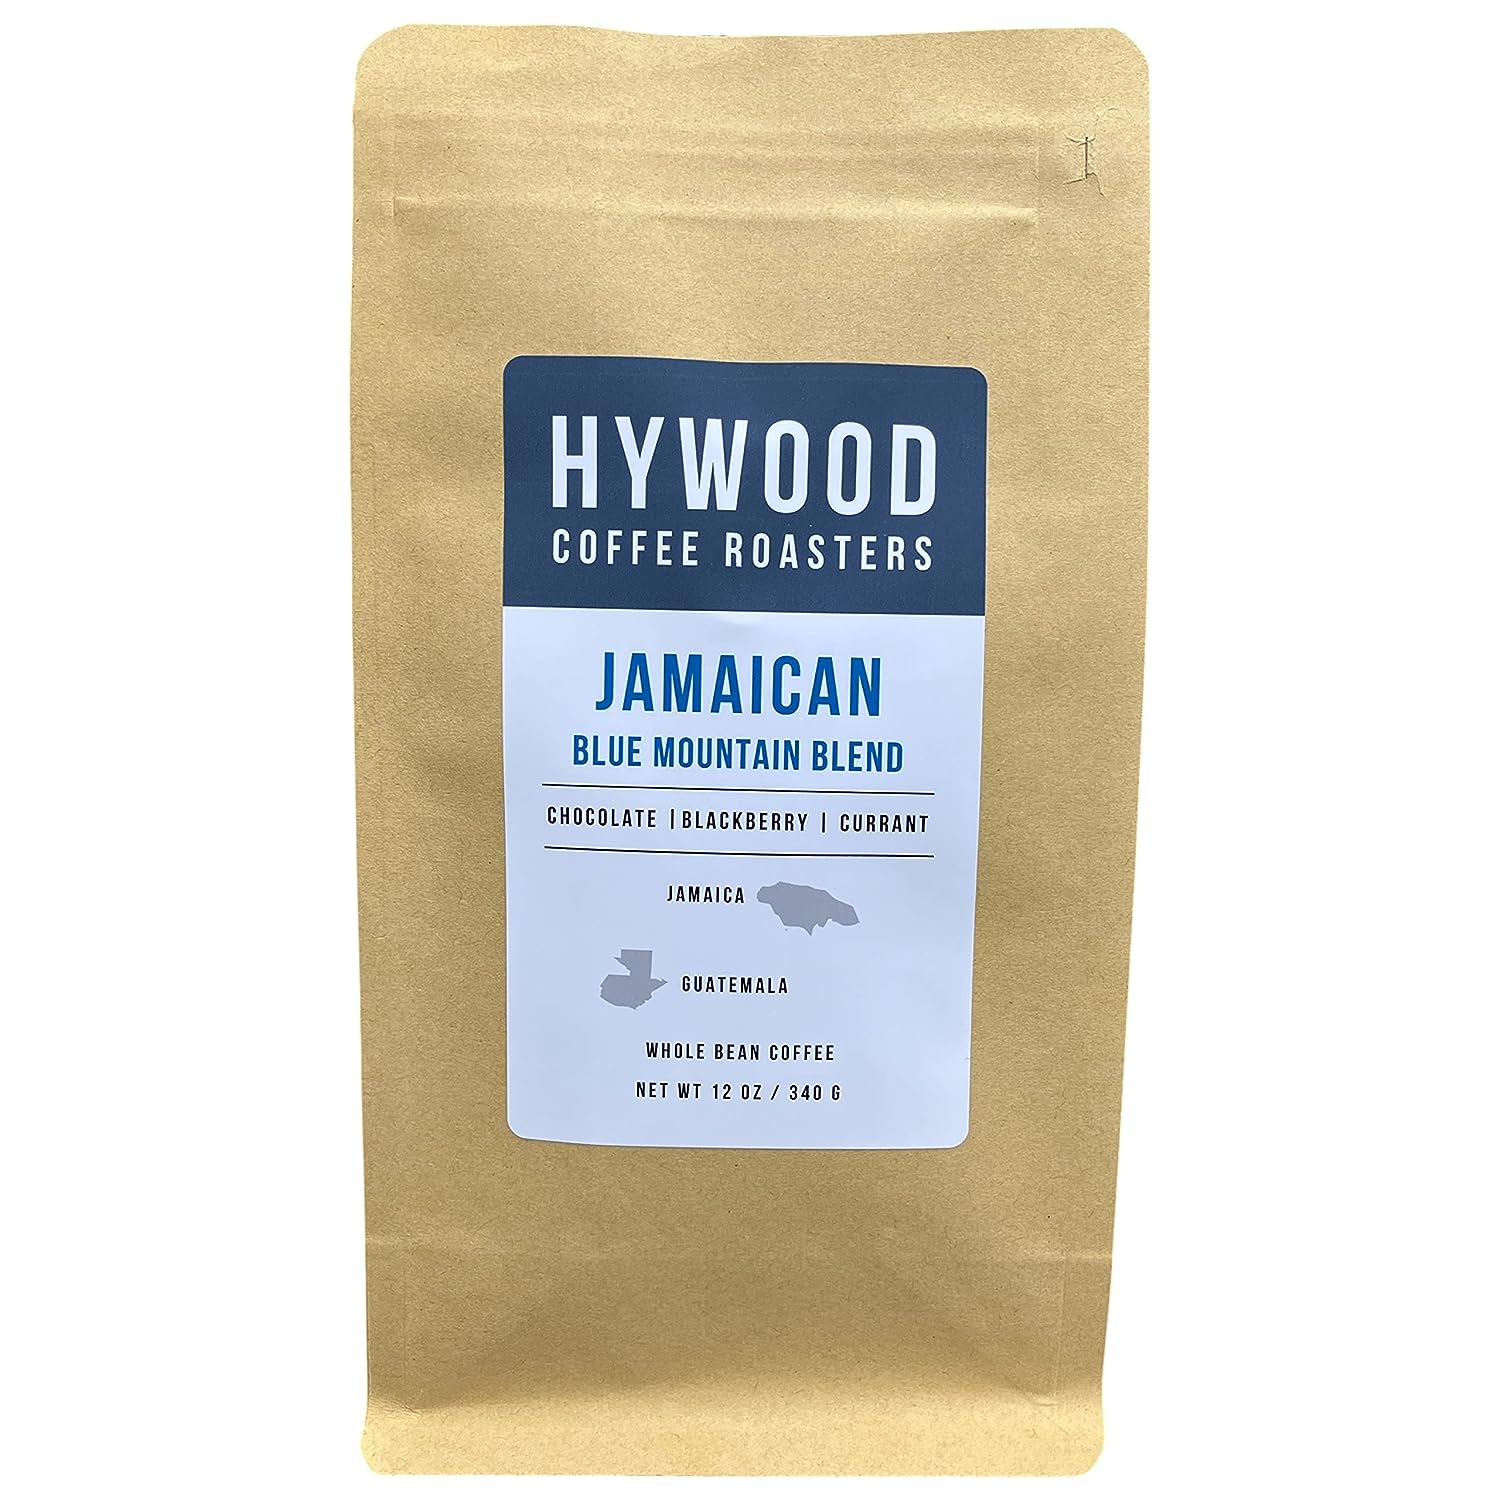 Hywood Coffee Roasters Jamaican Blue Mountain Blend, Whole Bean Coffee, Medium Roast, Small Batch, bag, Tasting Notes of Chocolate, Blackberry, Currant